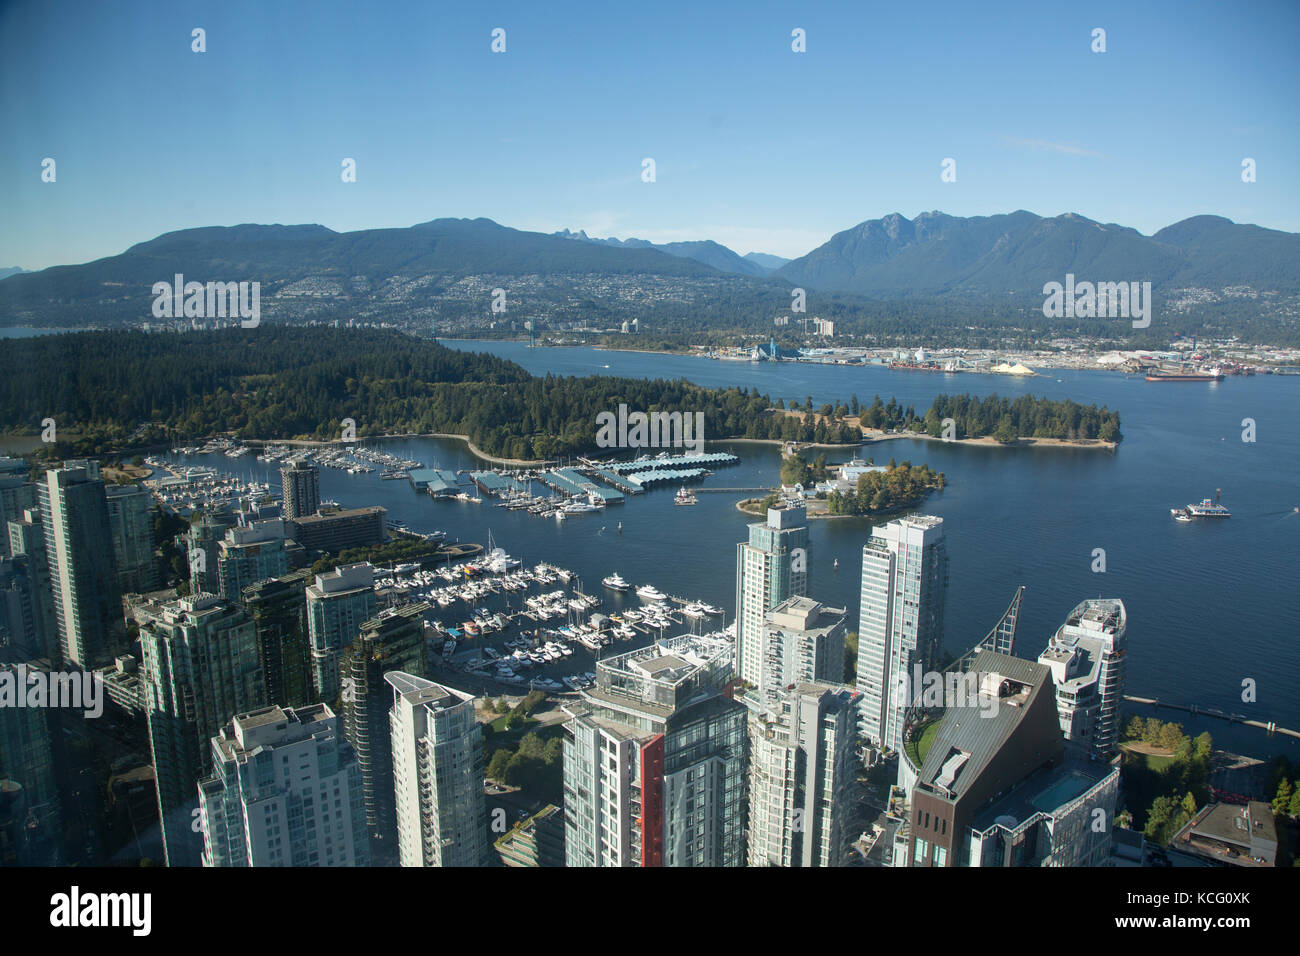 North America, Canada, British Columbia, Vancouver, high angle view of Vancouver, showing Stanley Park. Waterfront and harbour area. Stock Photo